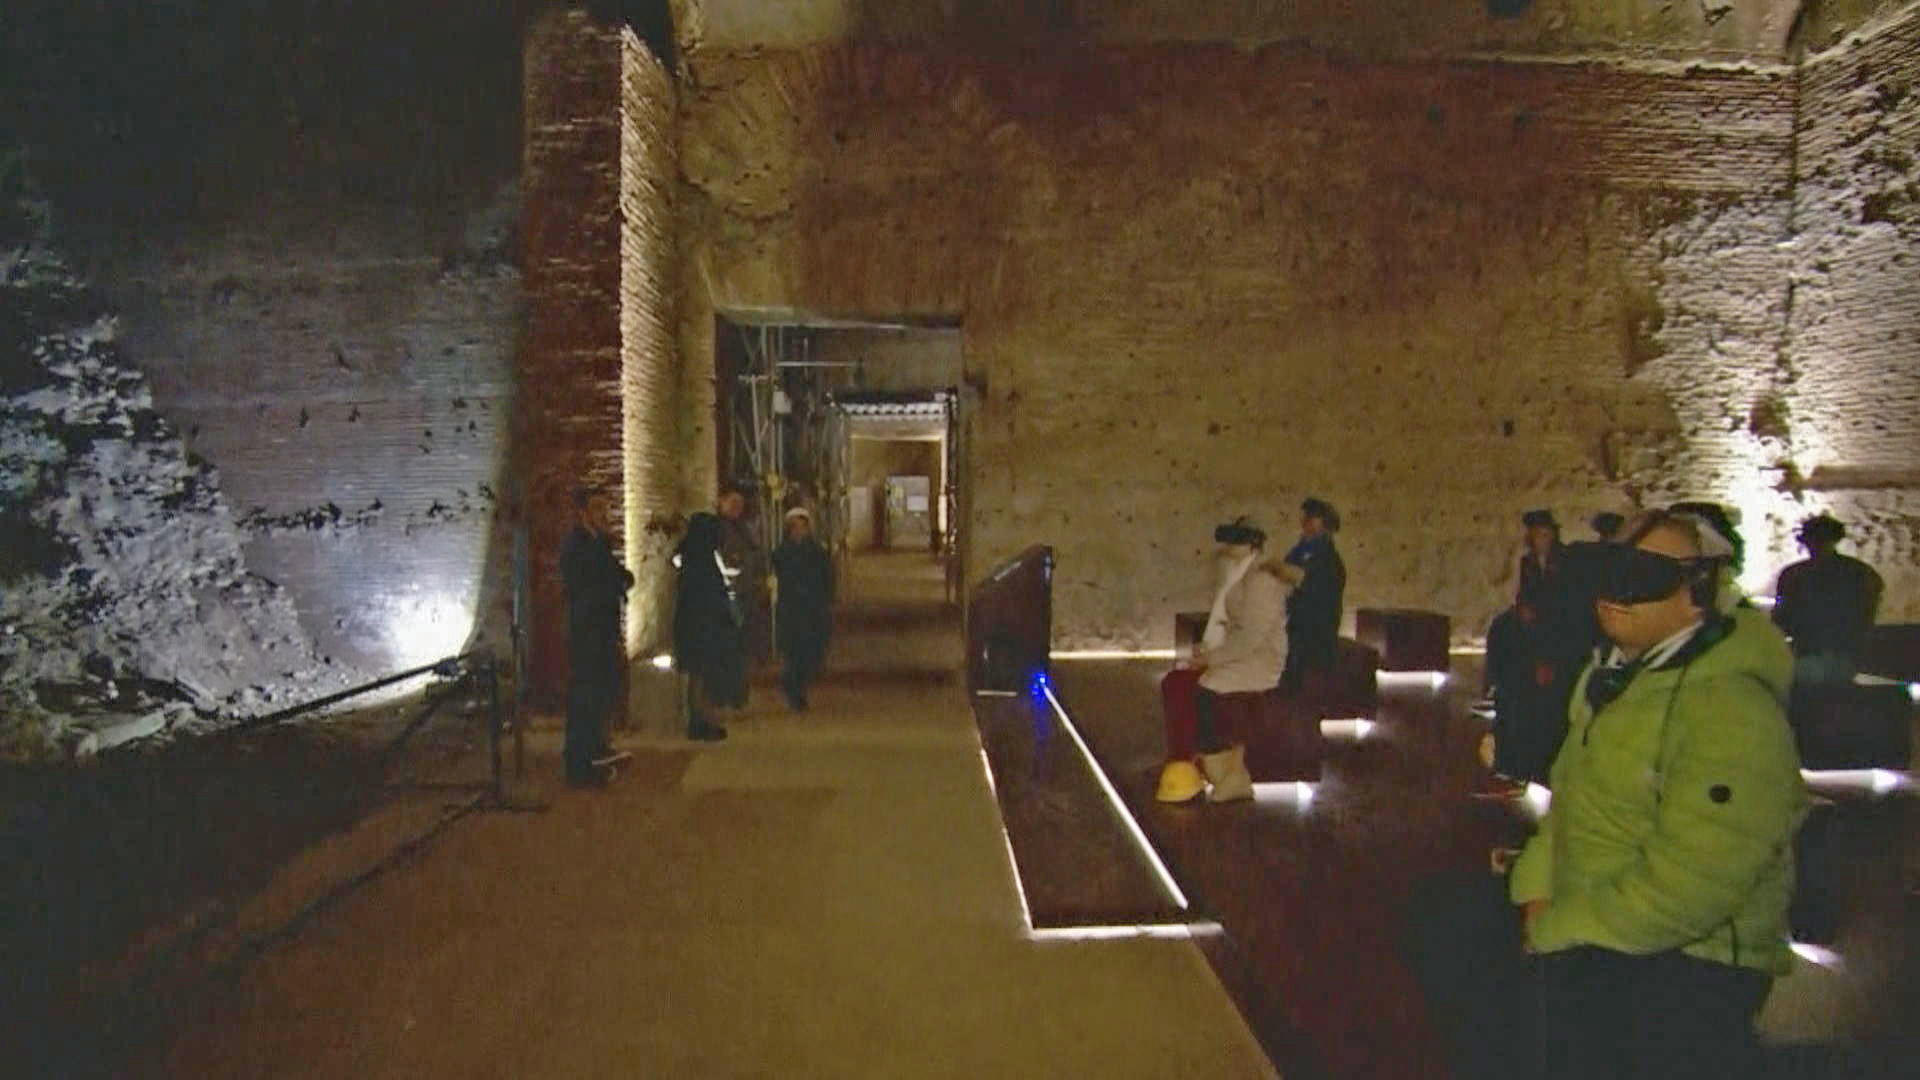 Virtual reality helps visitors transport back in time to ancient Roman ... - CBS News